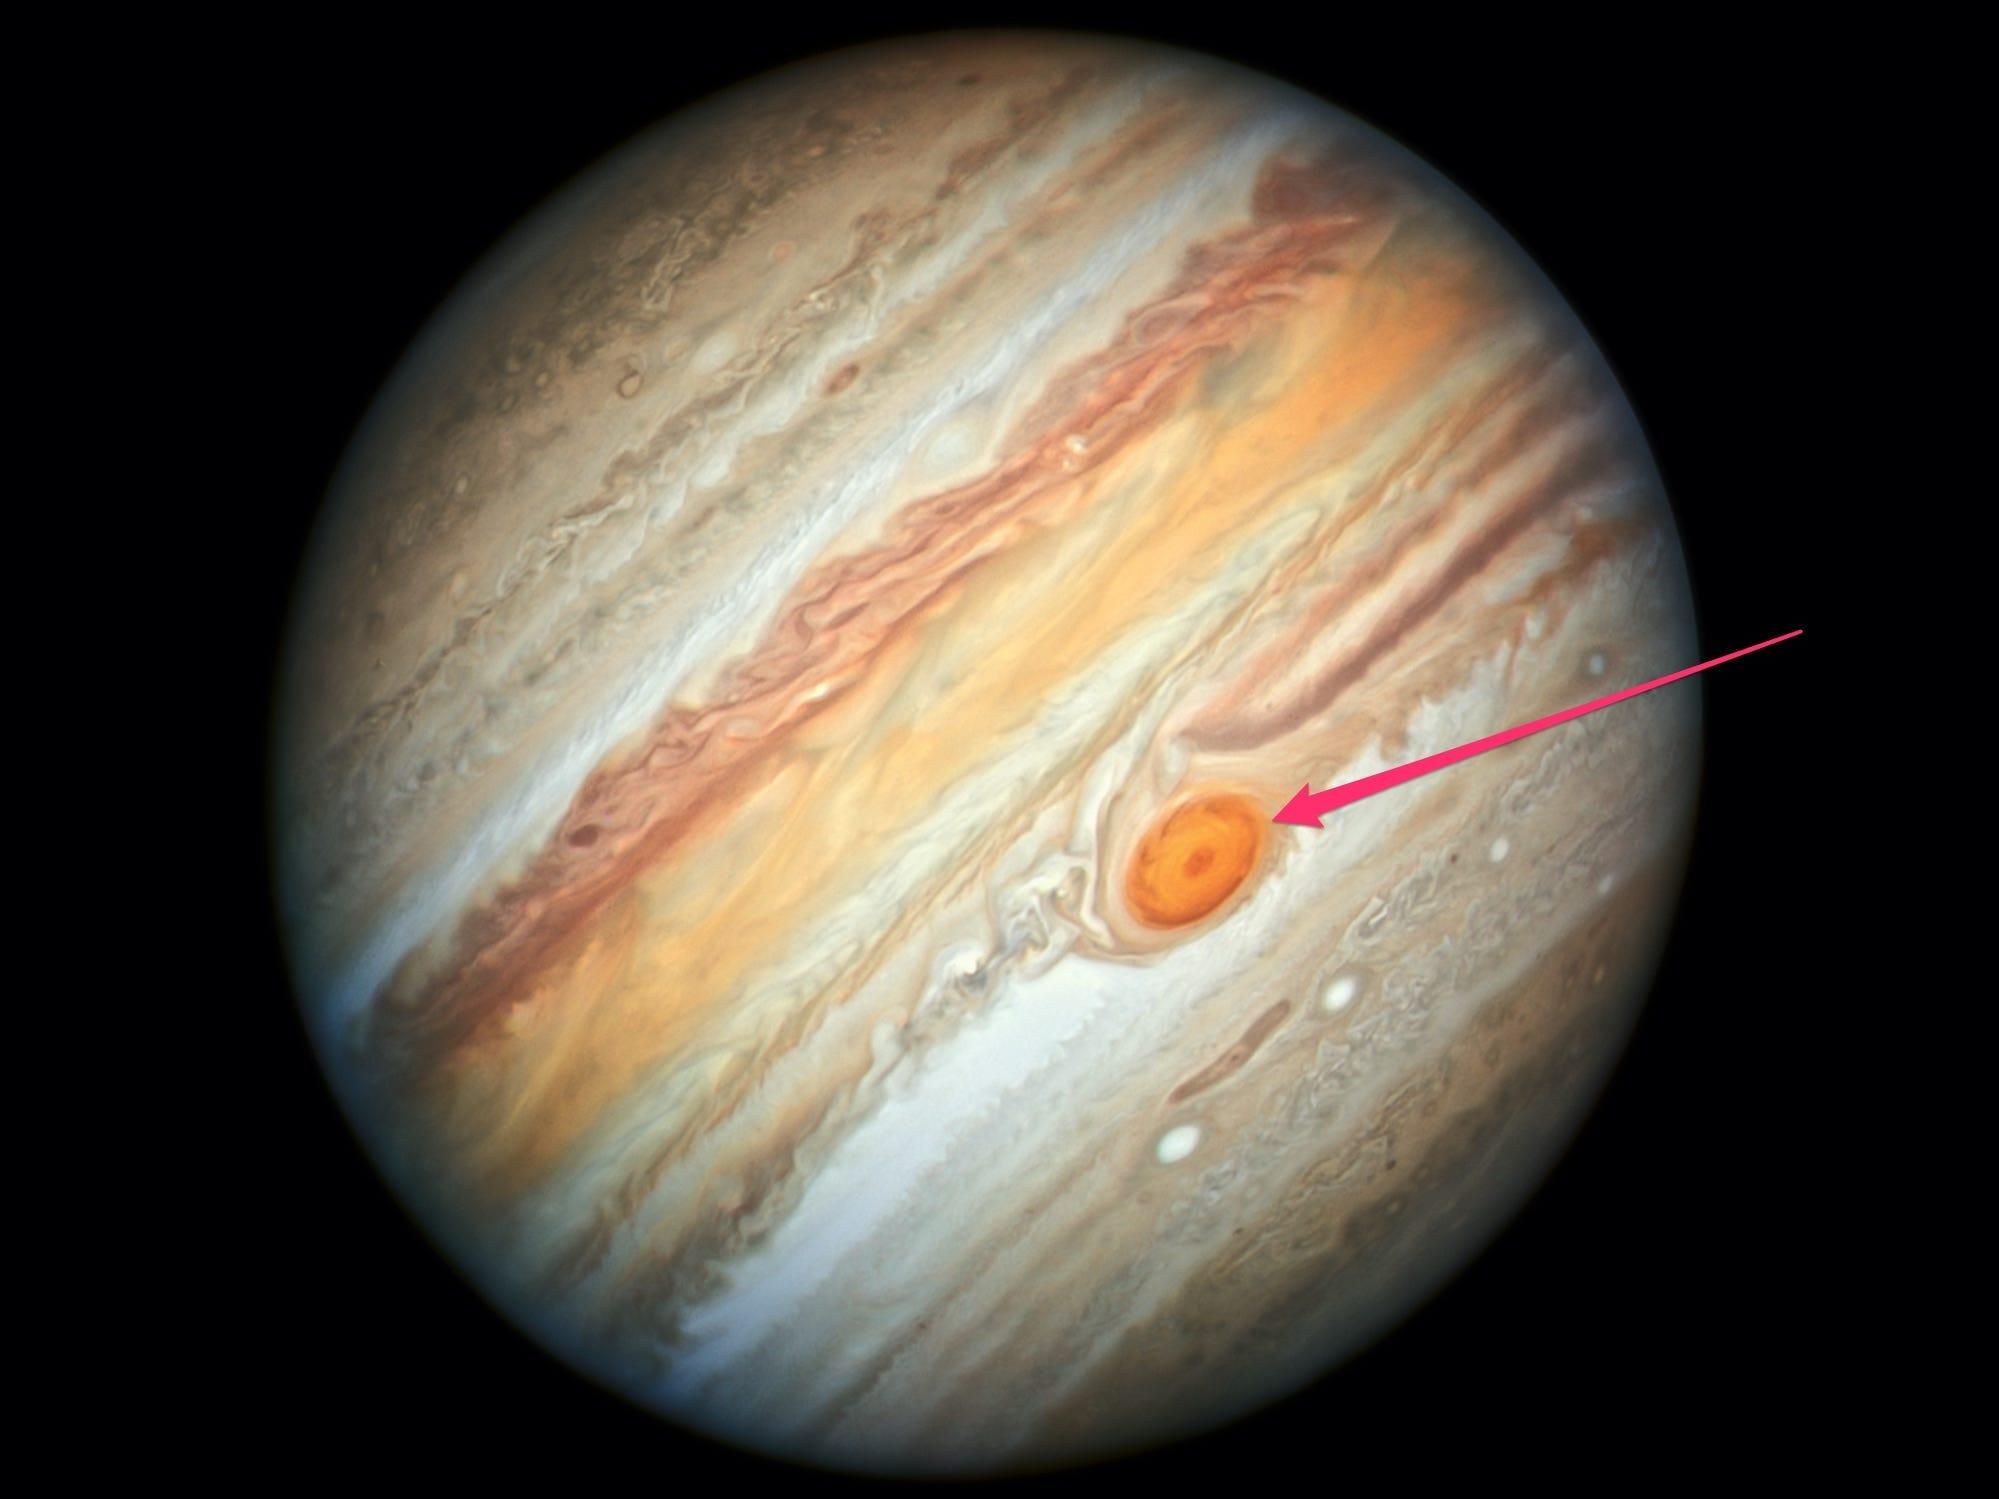 NASA’s Hubble Space Telescope has discovered a mysterious change in Jupiter’s Great Red Spot